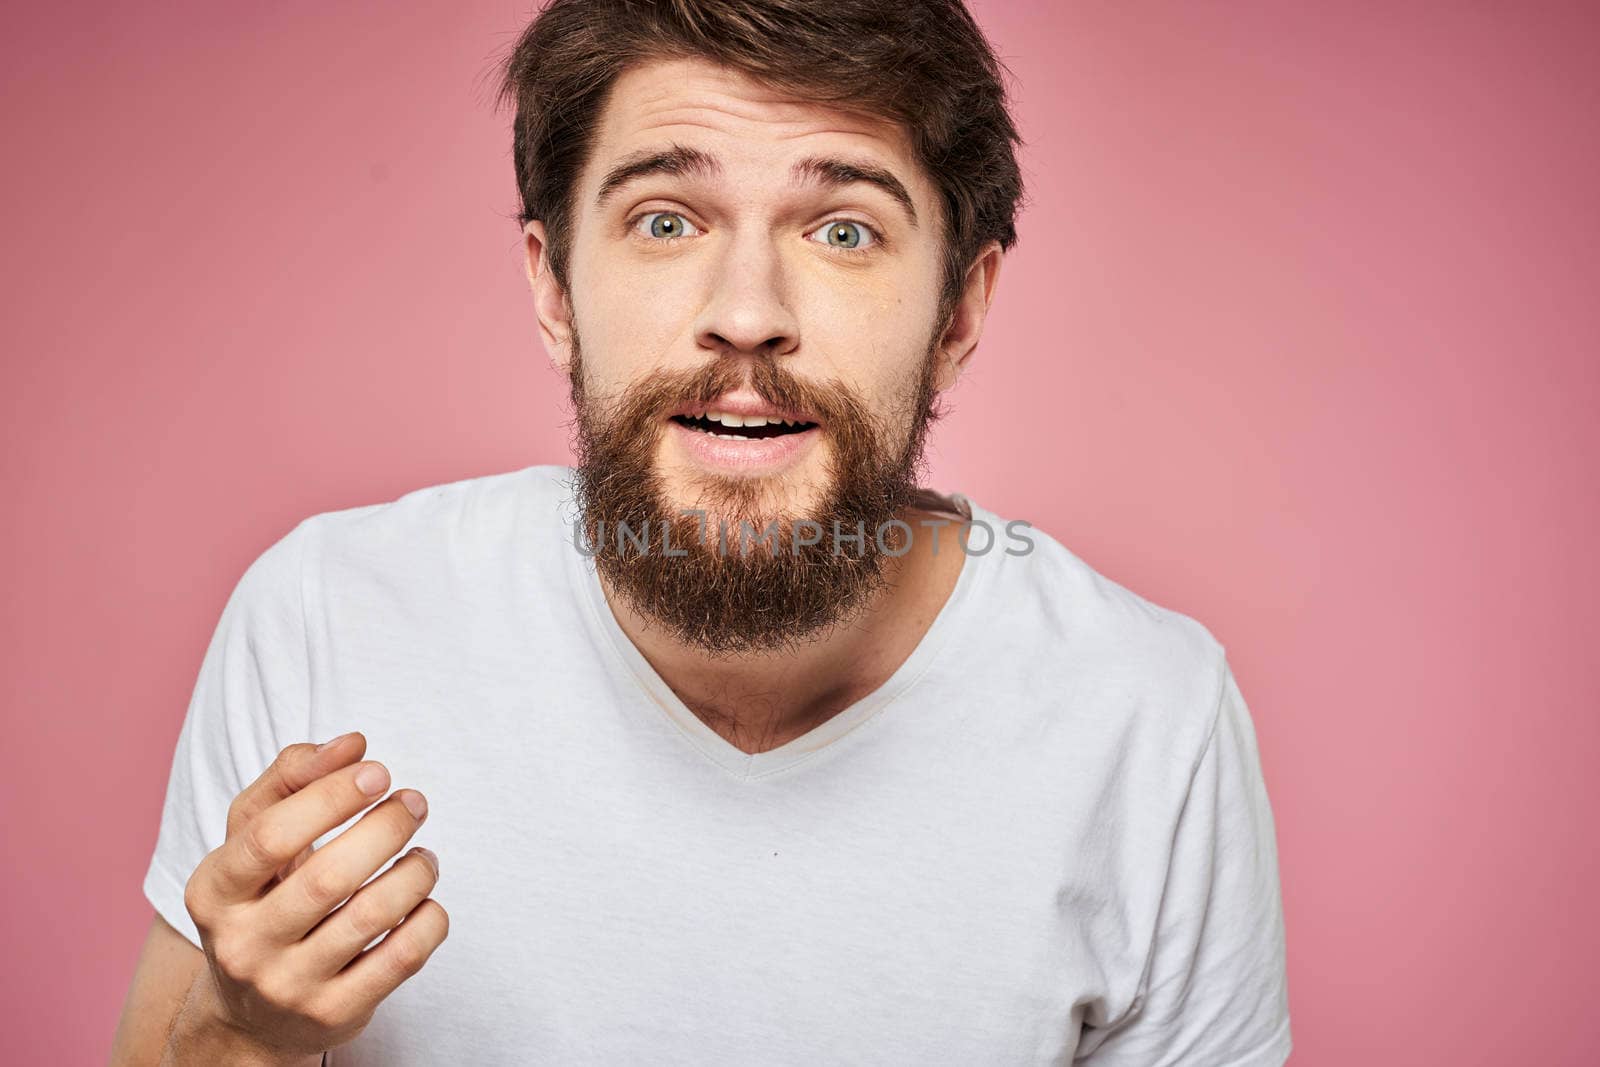 Man in white t-shirt emotions lifestyle facial expression cropped view pink background. by SHOTPRIME